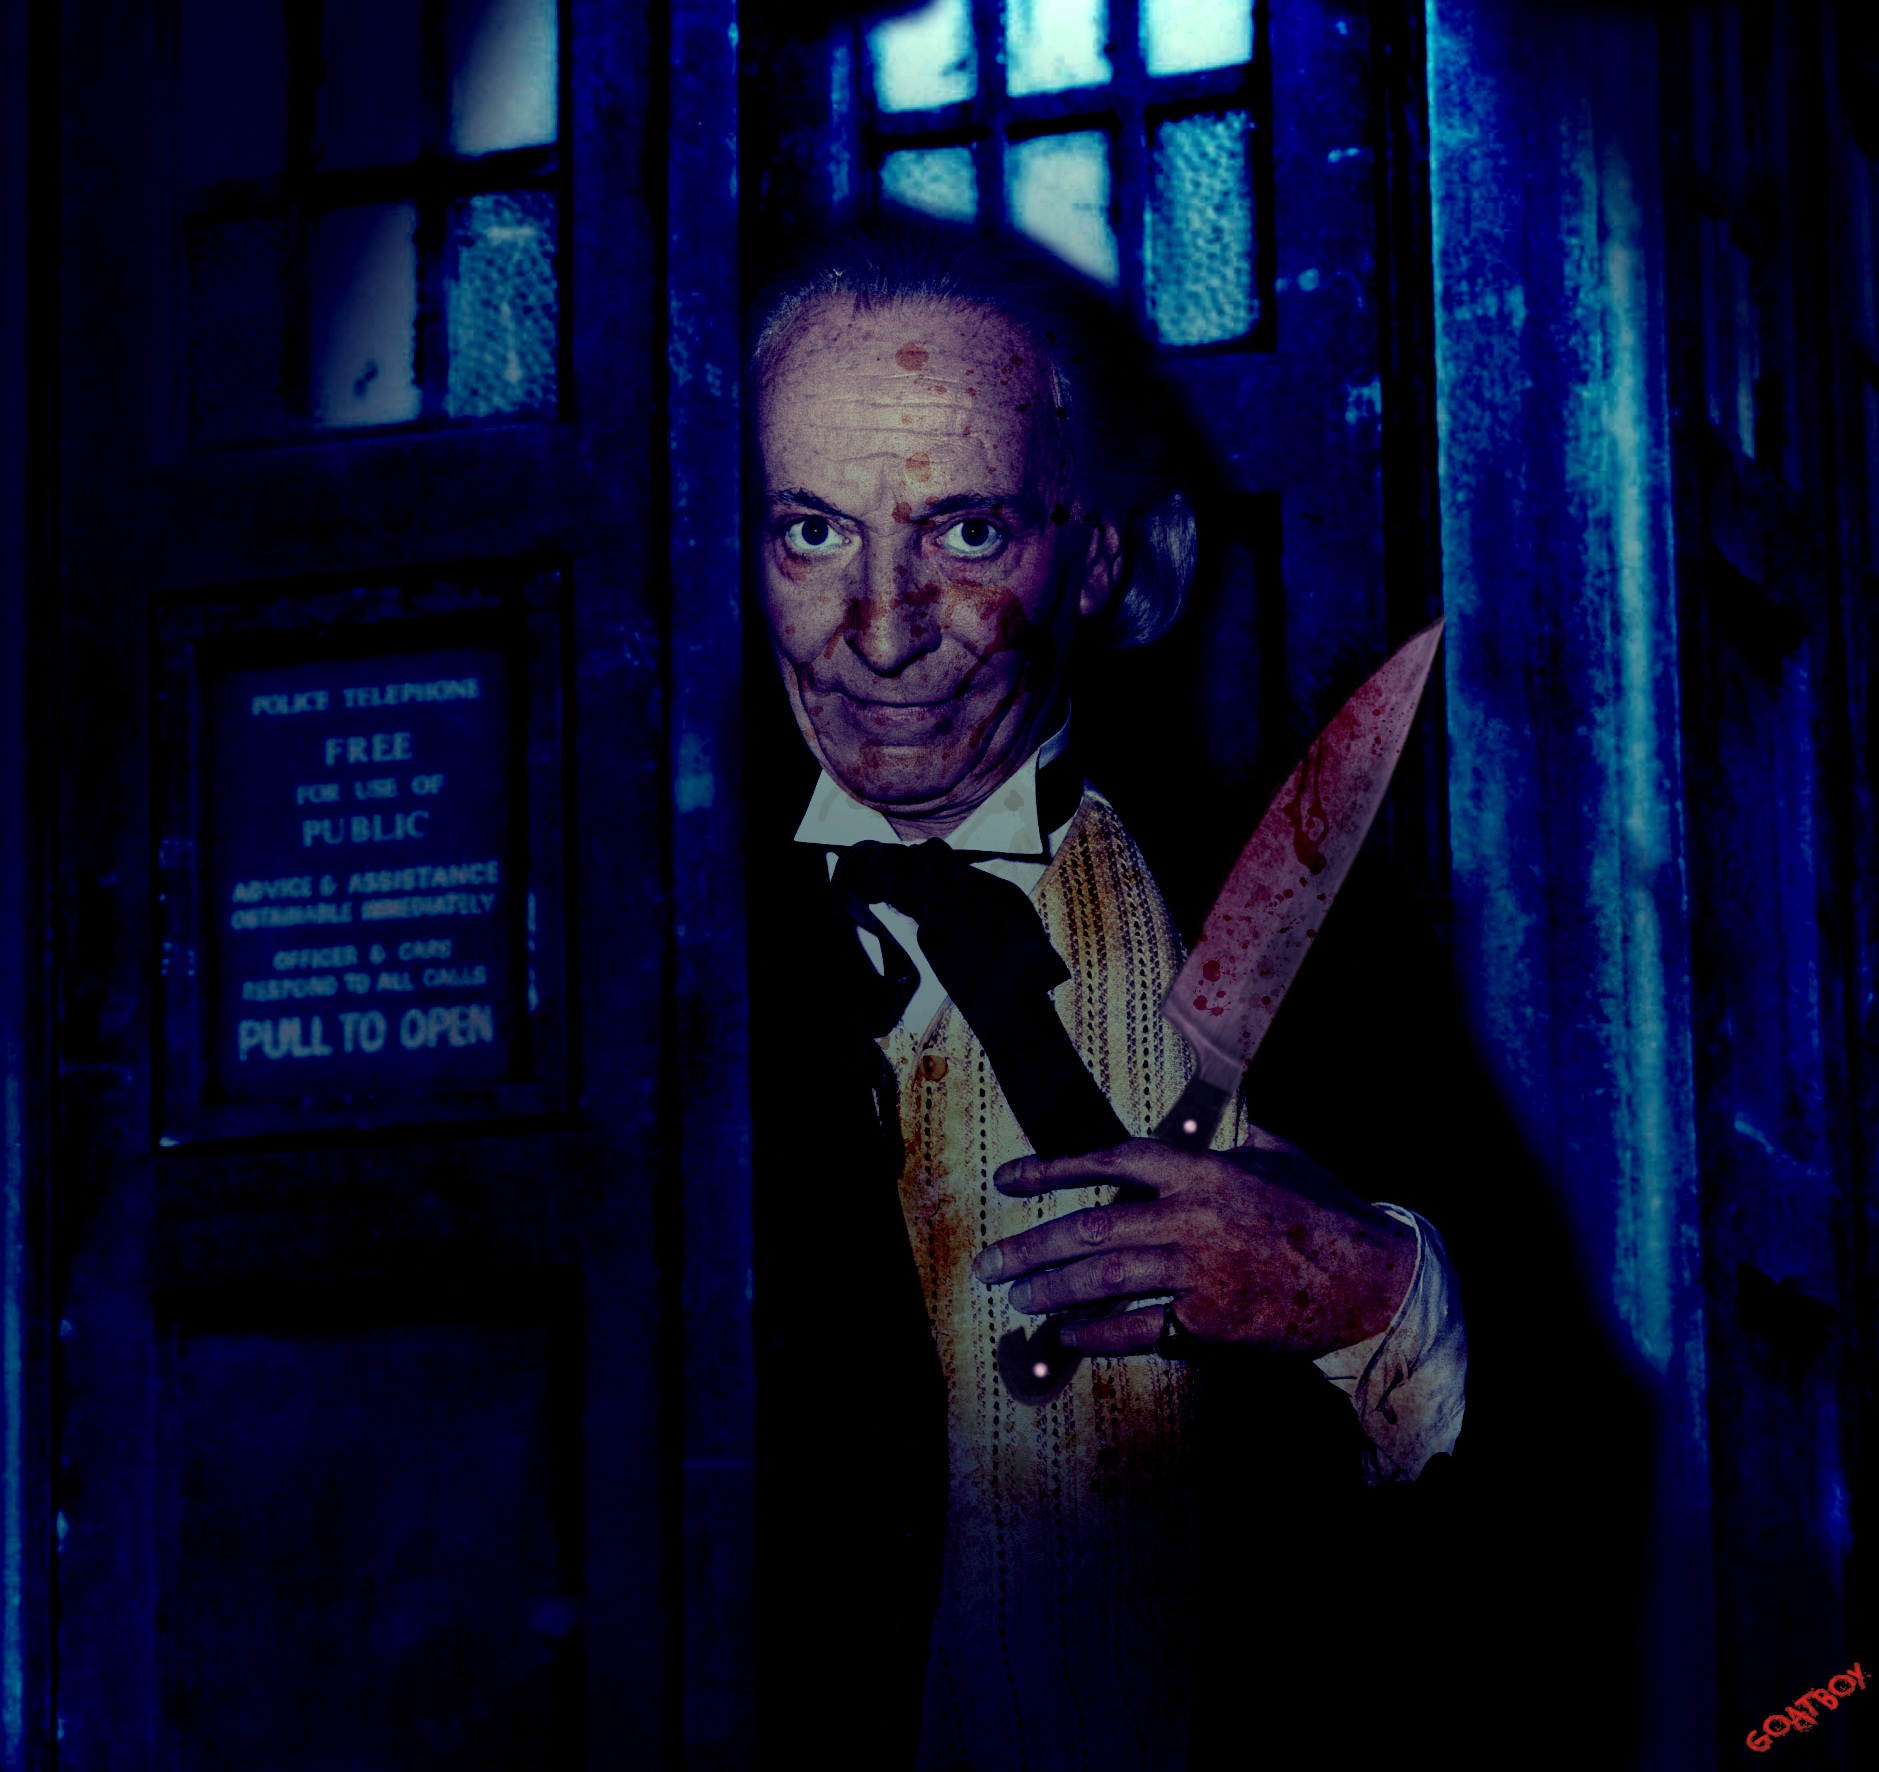 http://themoriartyofgore.files.wordpress.com/2013/02/dr-who-ripper.png